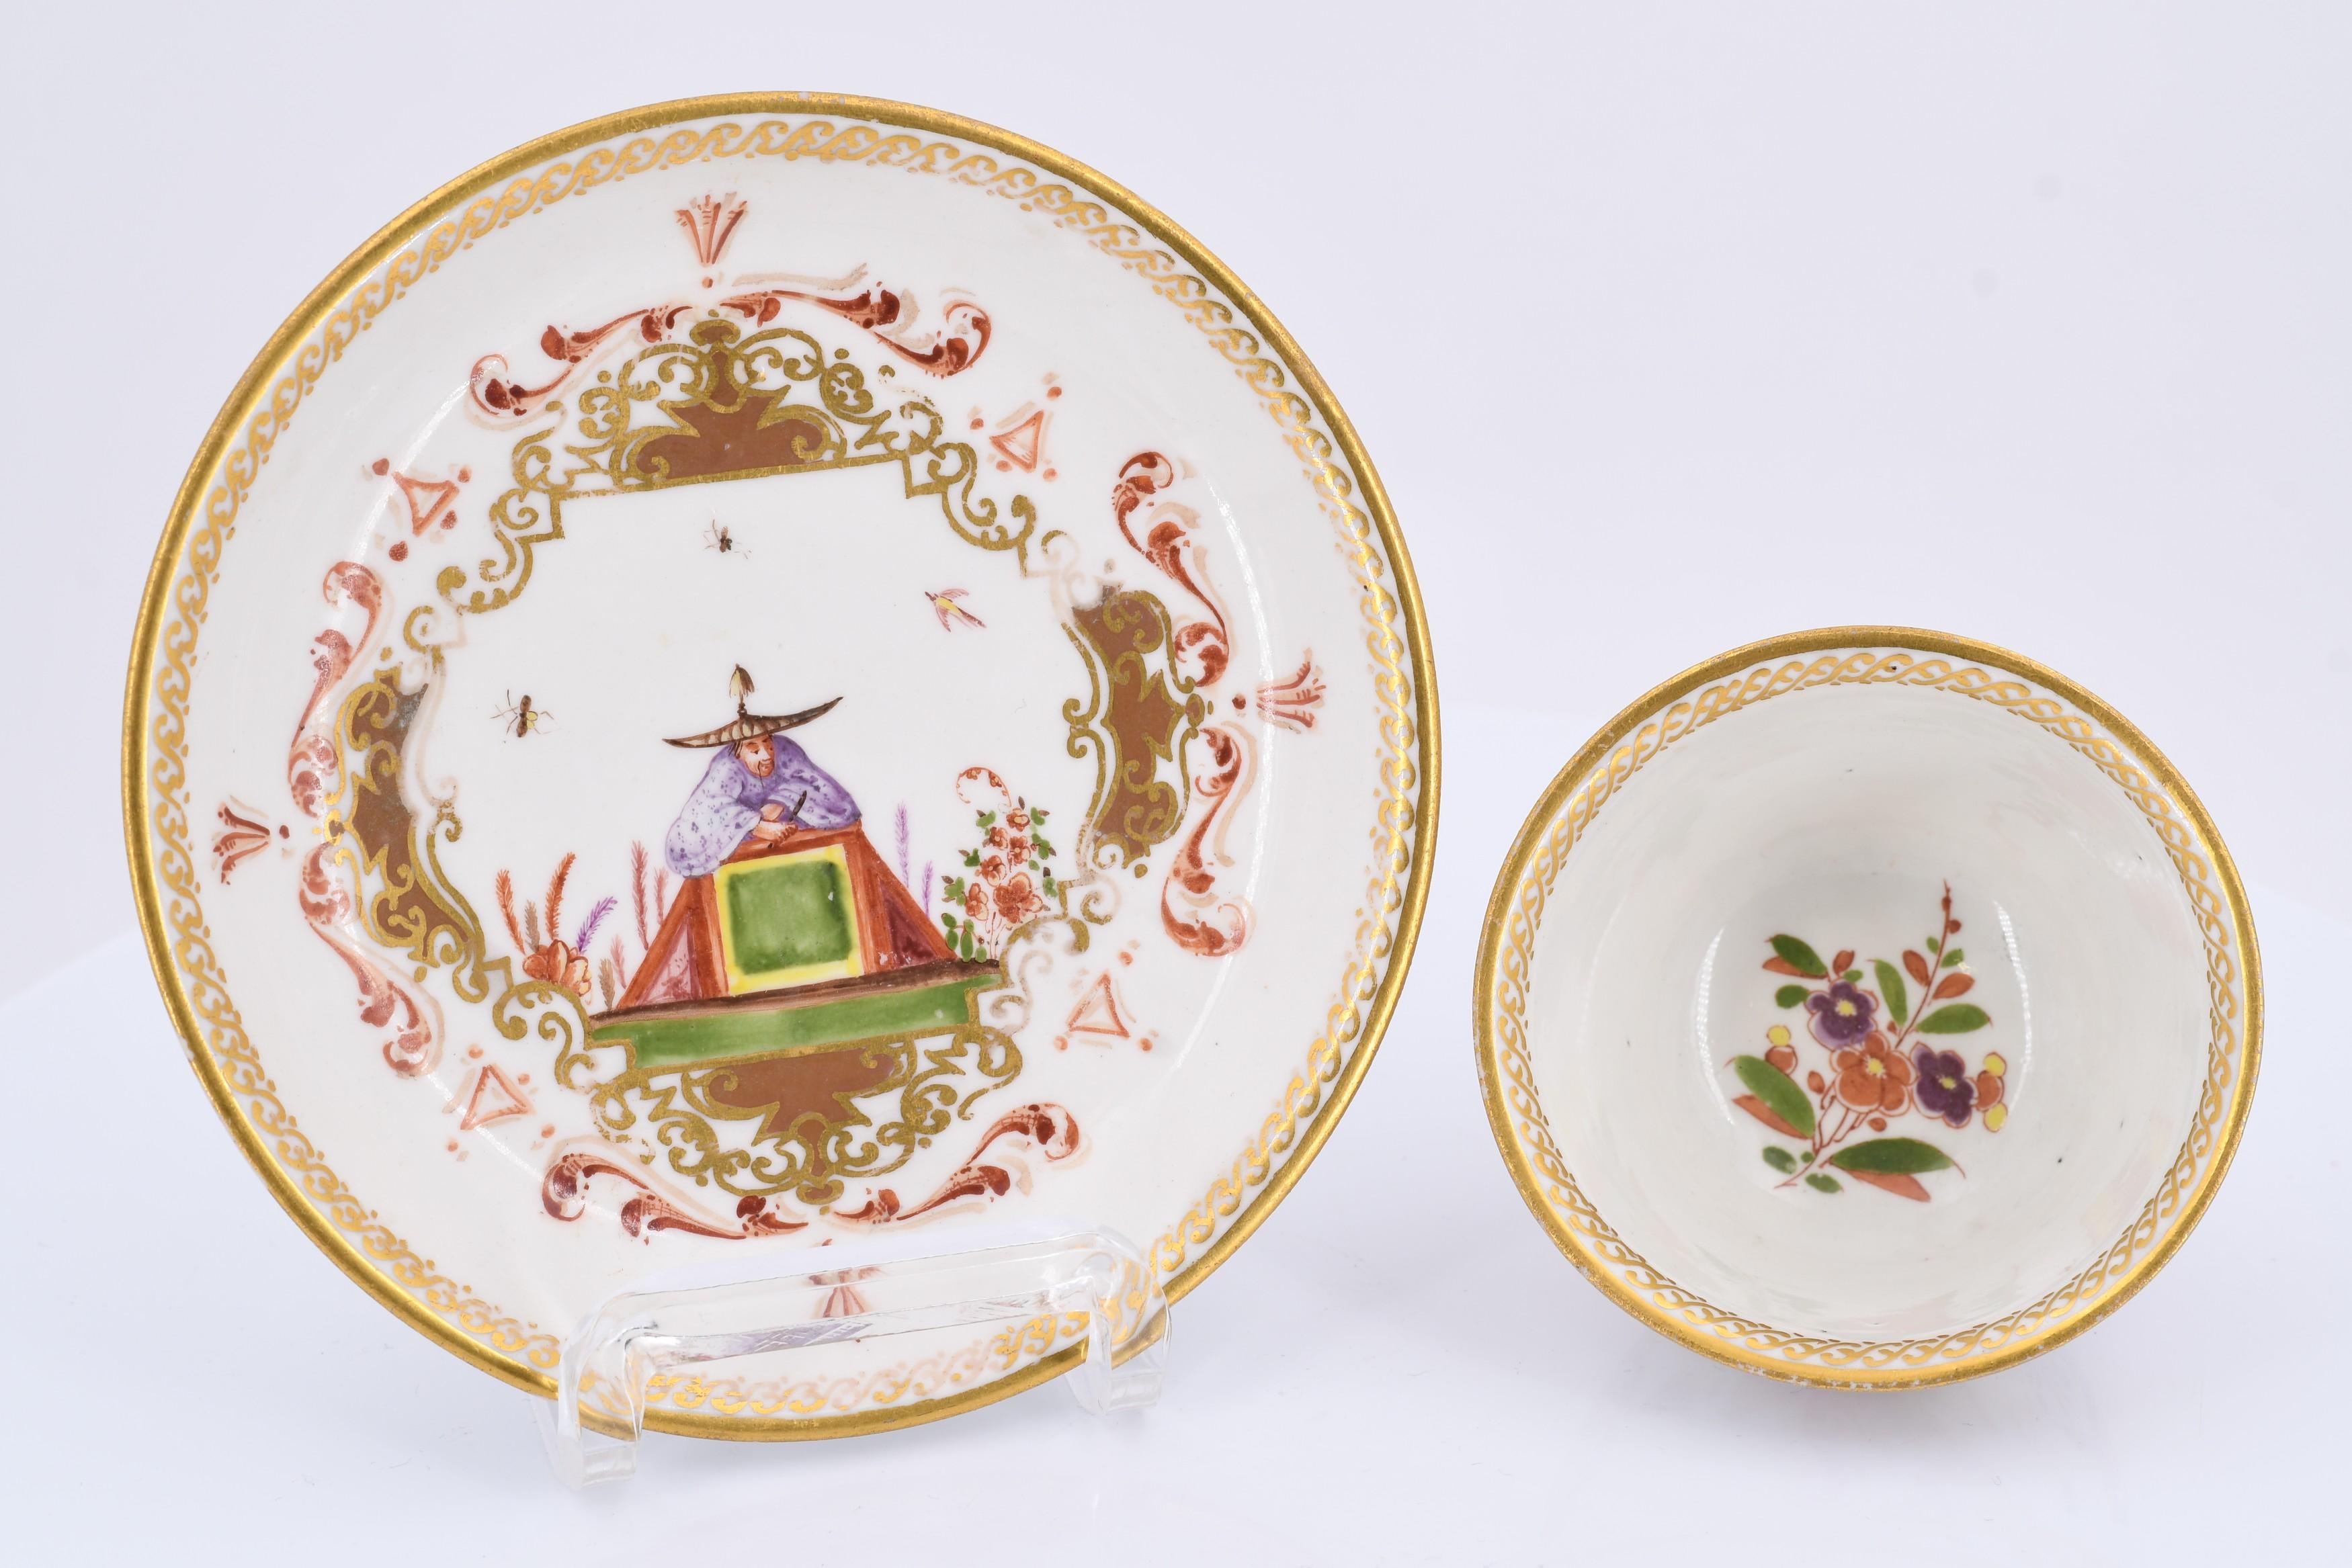 Tea bowl and saucer with chinoiseries - Image 6 of 7